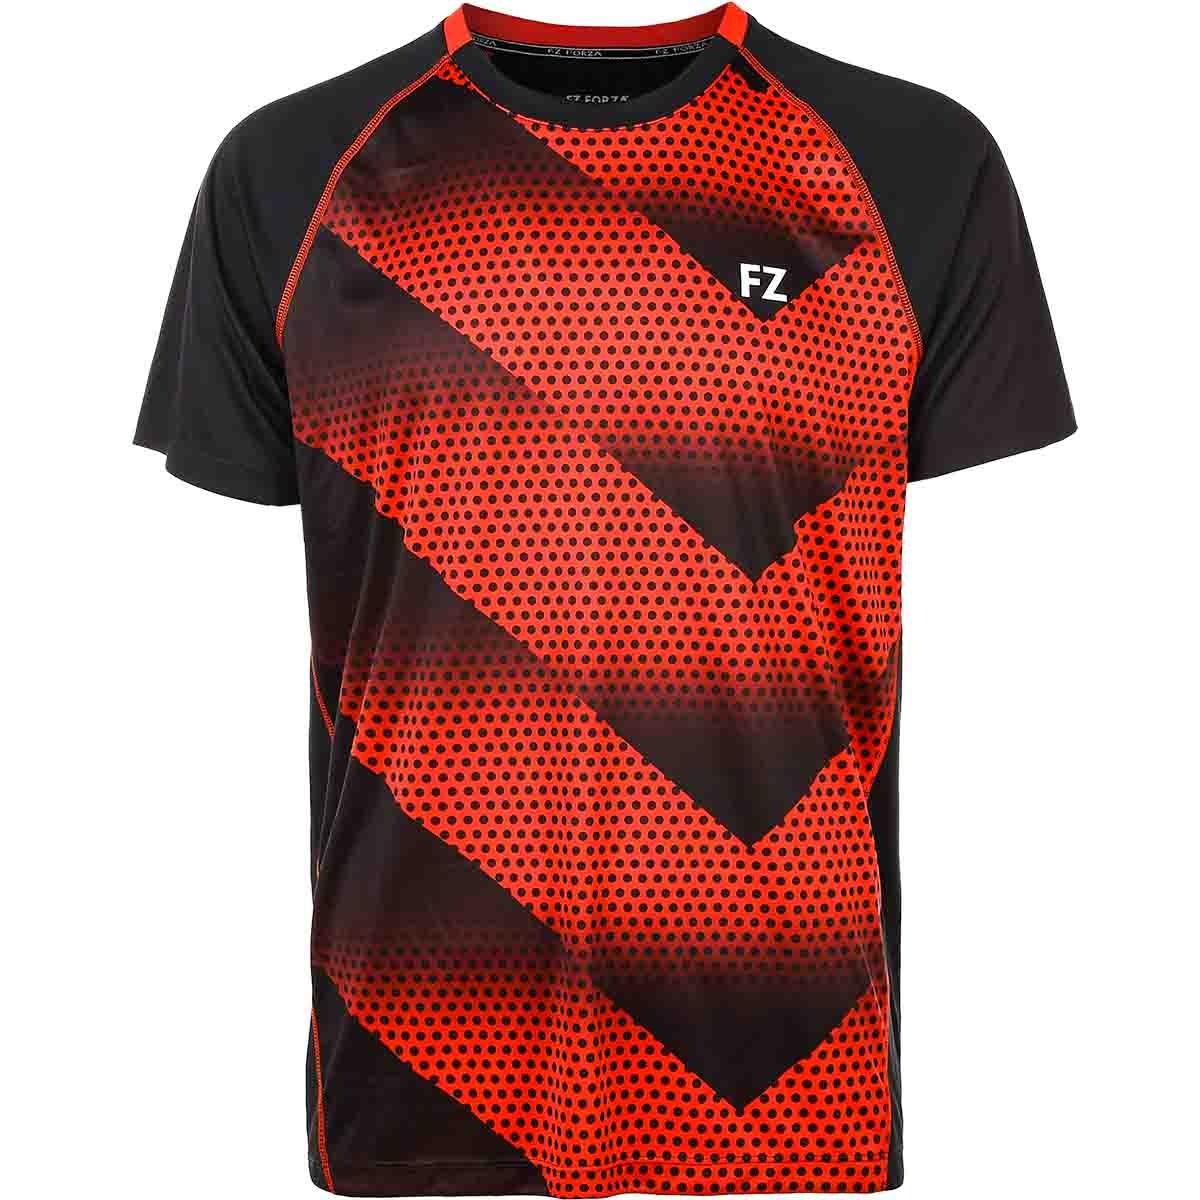 FZ Forza Monthy Junior Badminton T-Shirt - 4009 Chinese Red